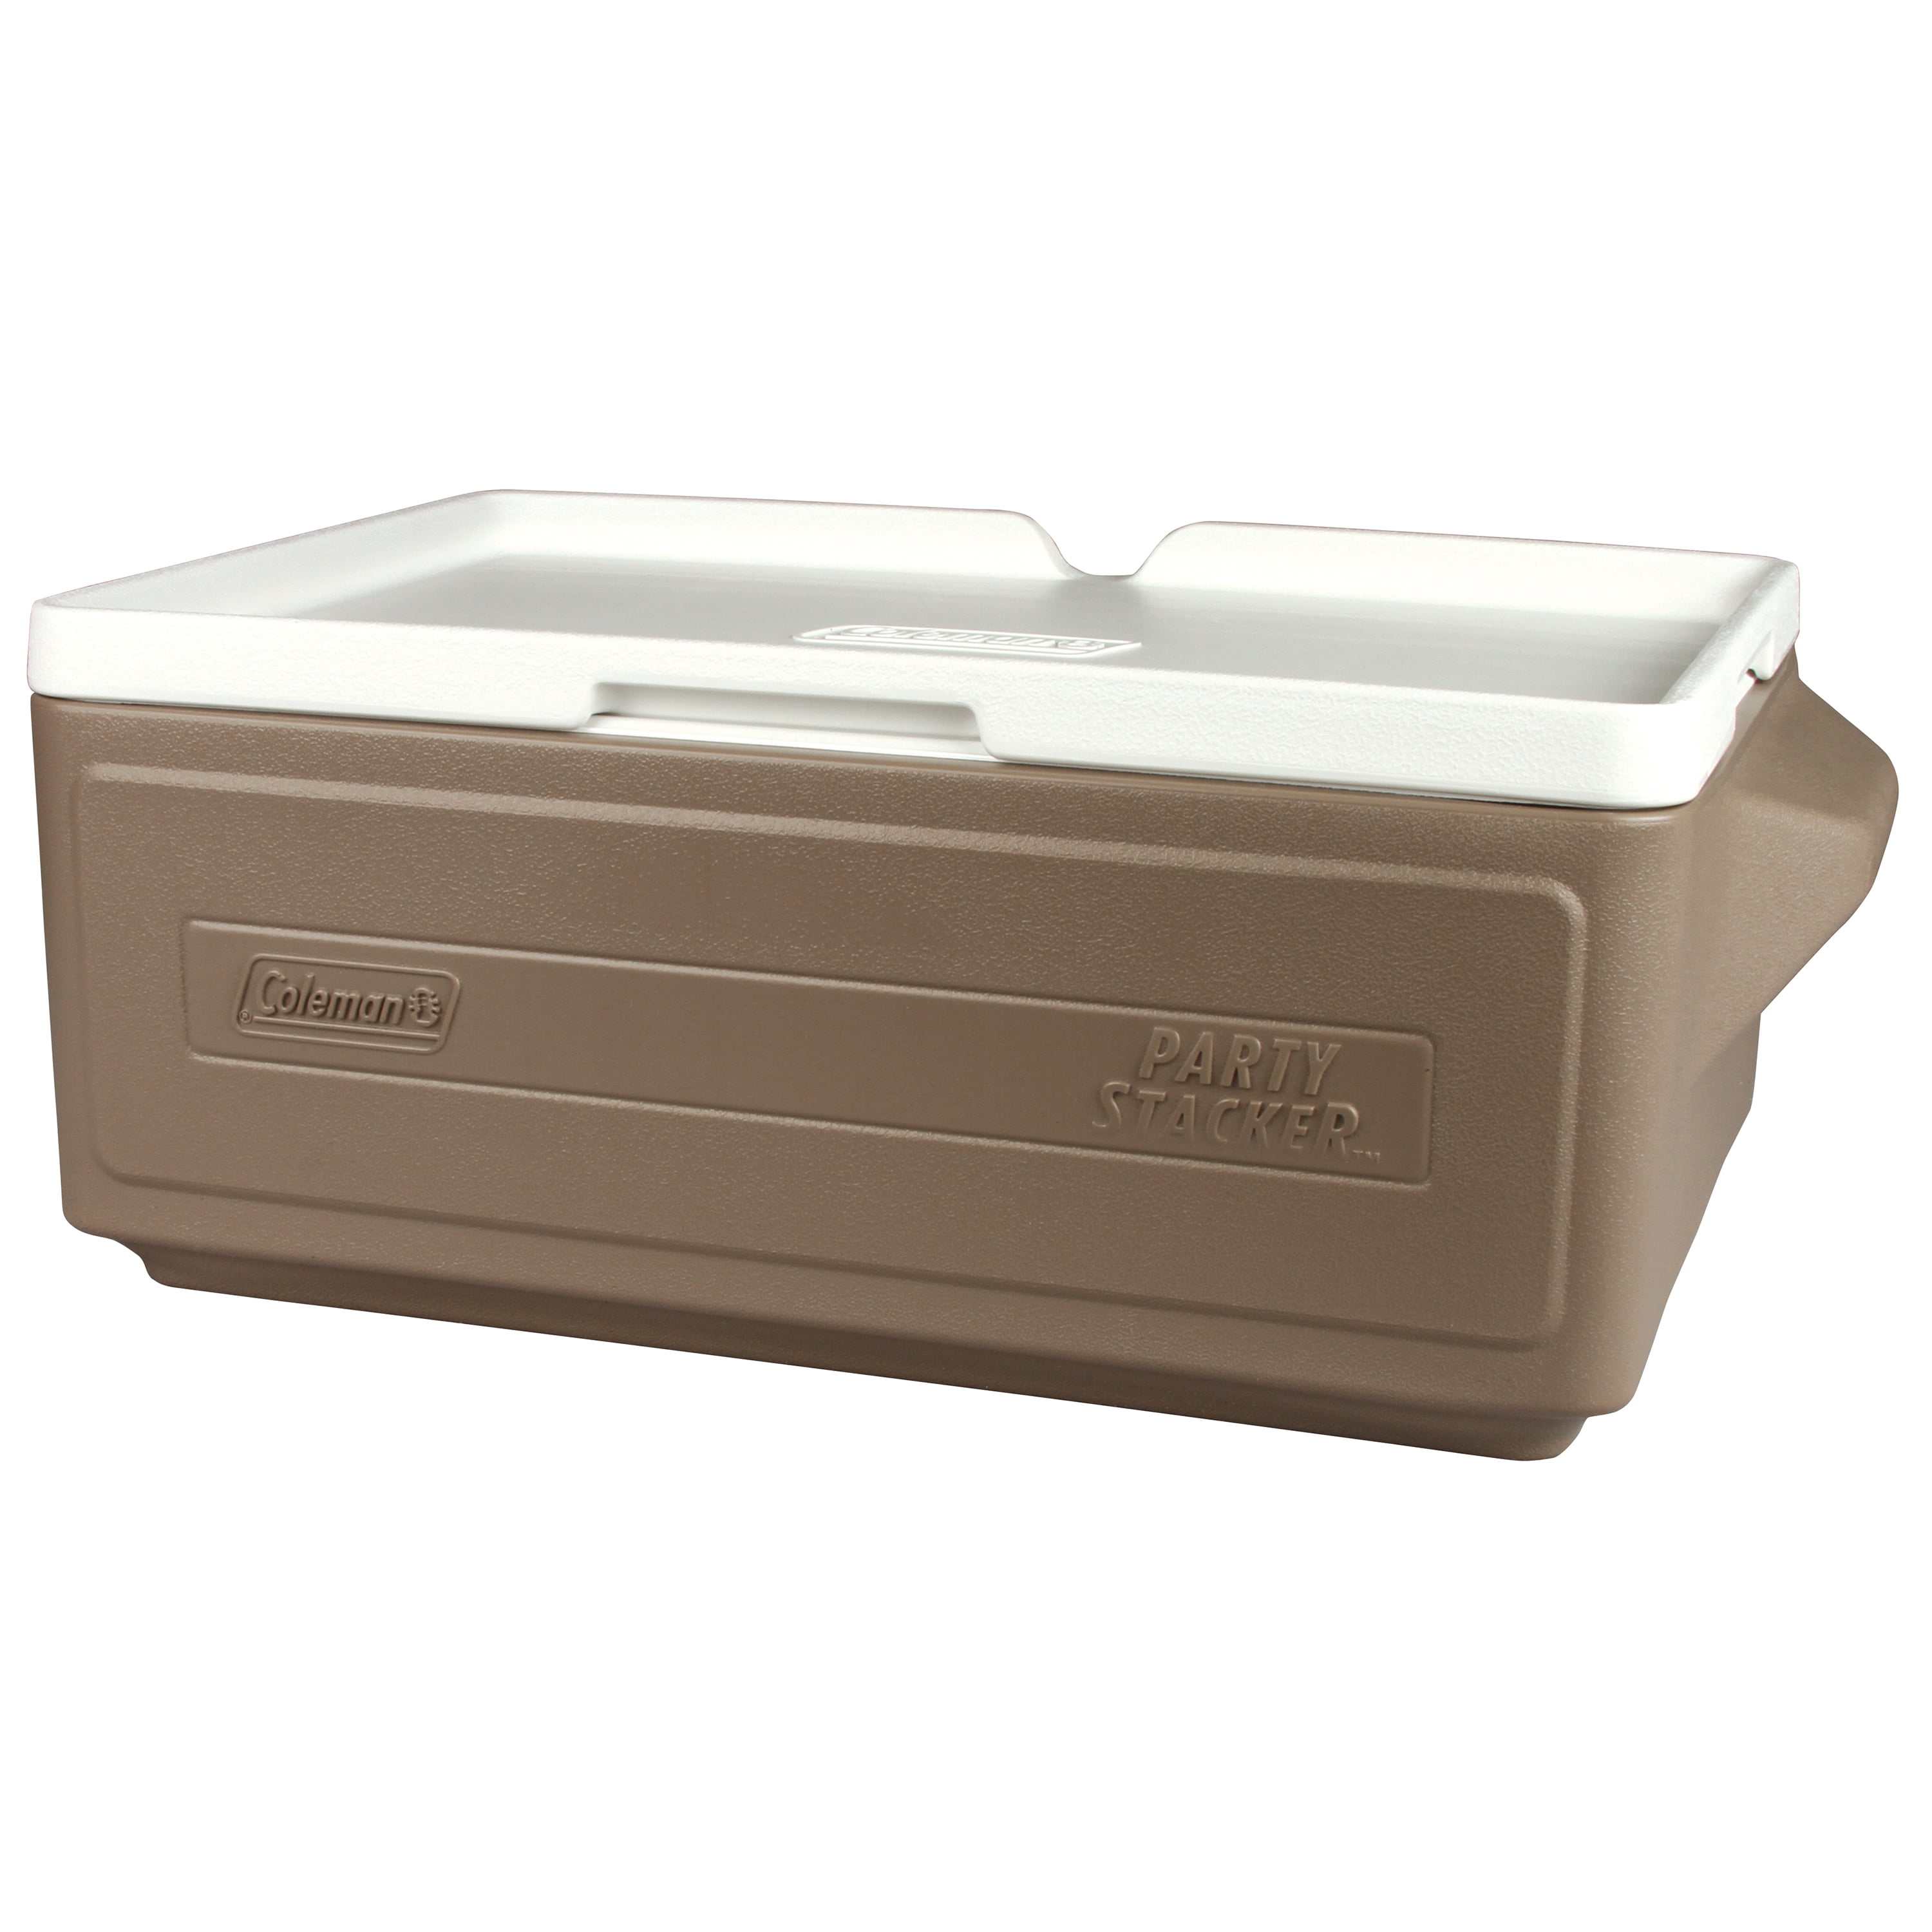 Coleman 24-Can Party Stacker Portable Cooler, Gray picture picture image